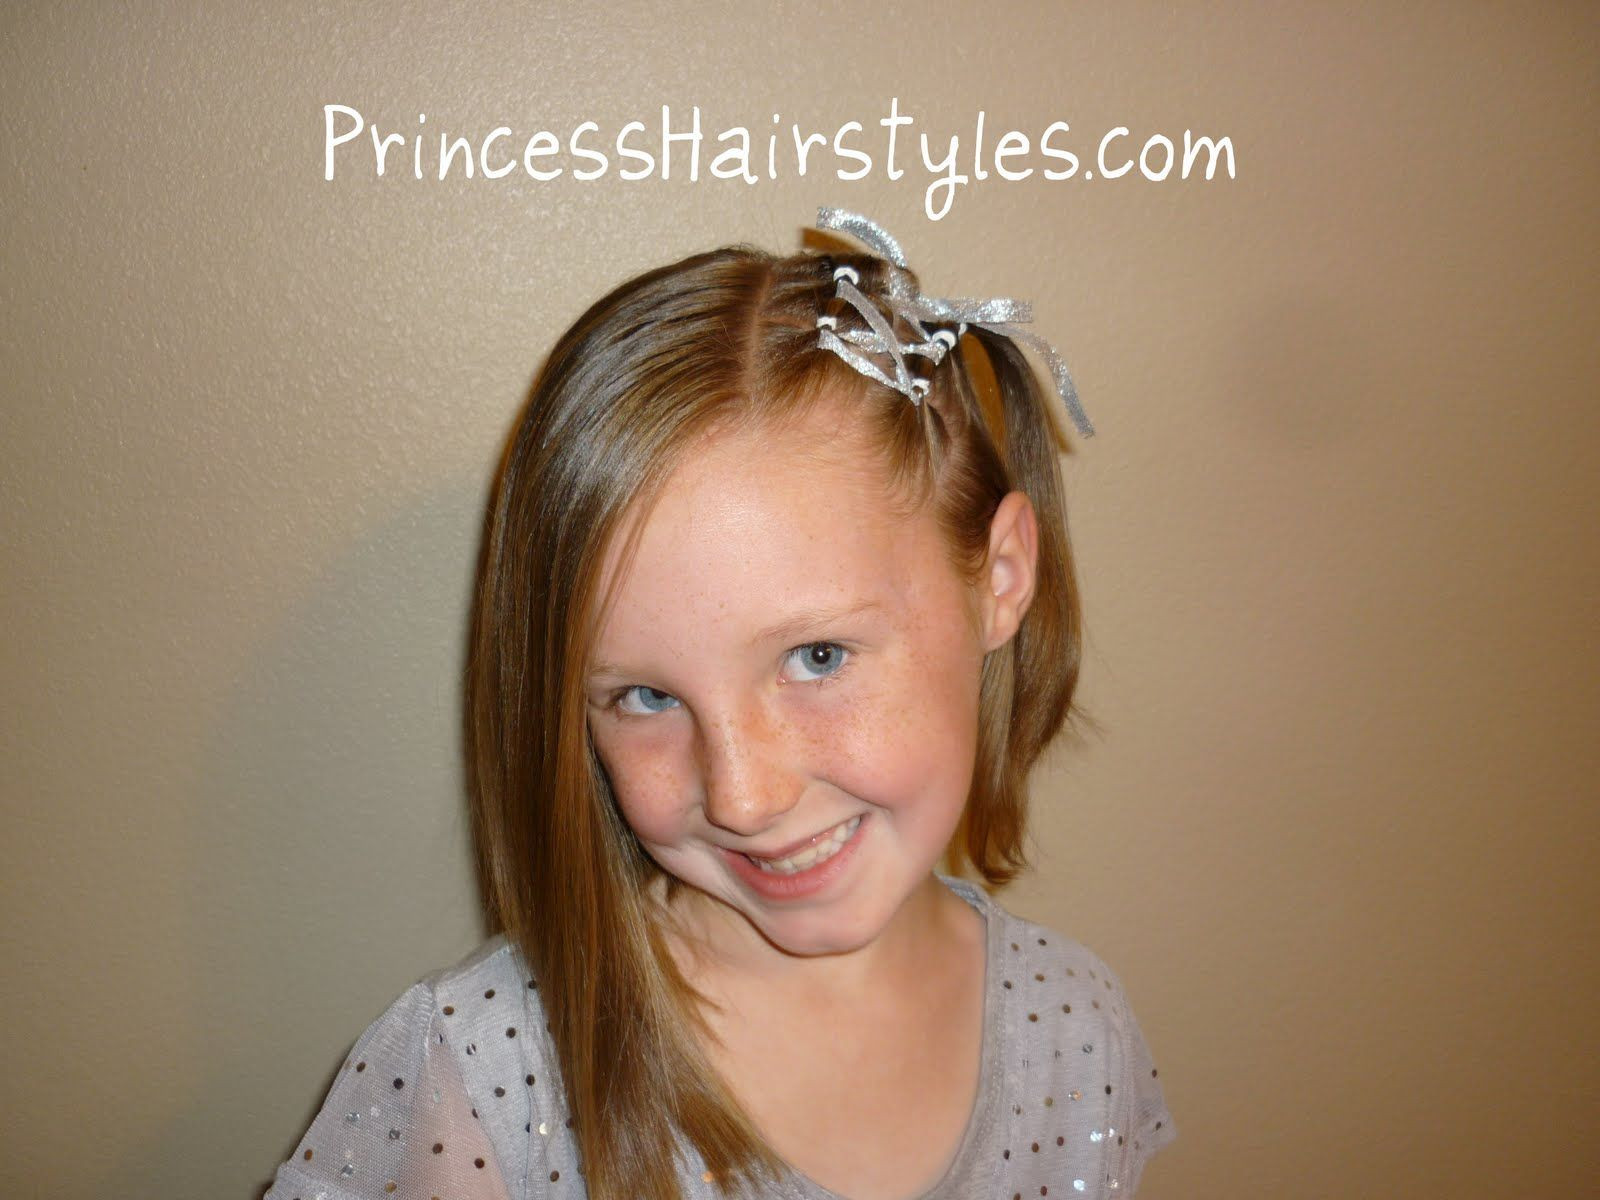 Cute Haircuts For 11 Year Olds
 TOP 10 cute haircuts for 11 year olds girls